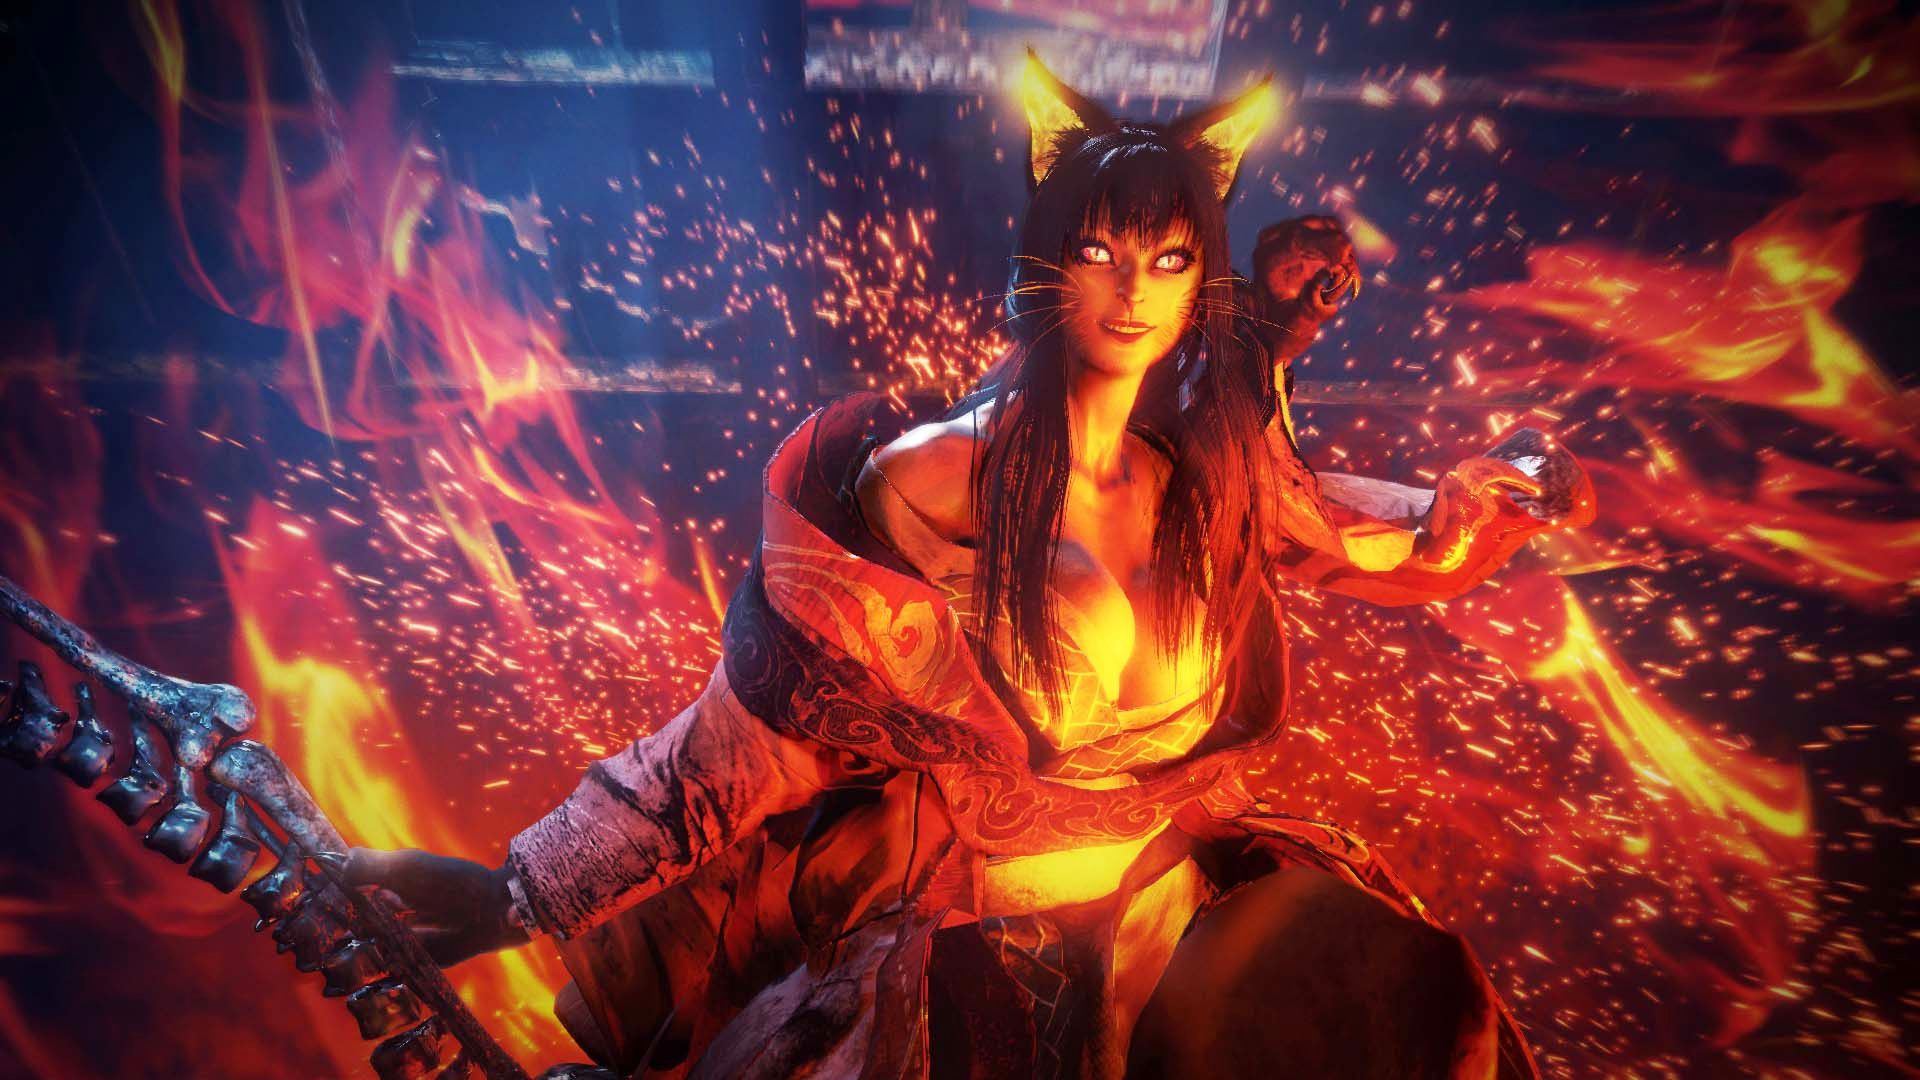 Nioh The New Image Of Gameplay To Show A Beautiful Female